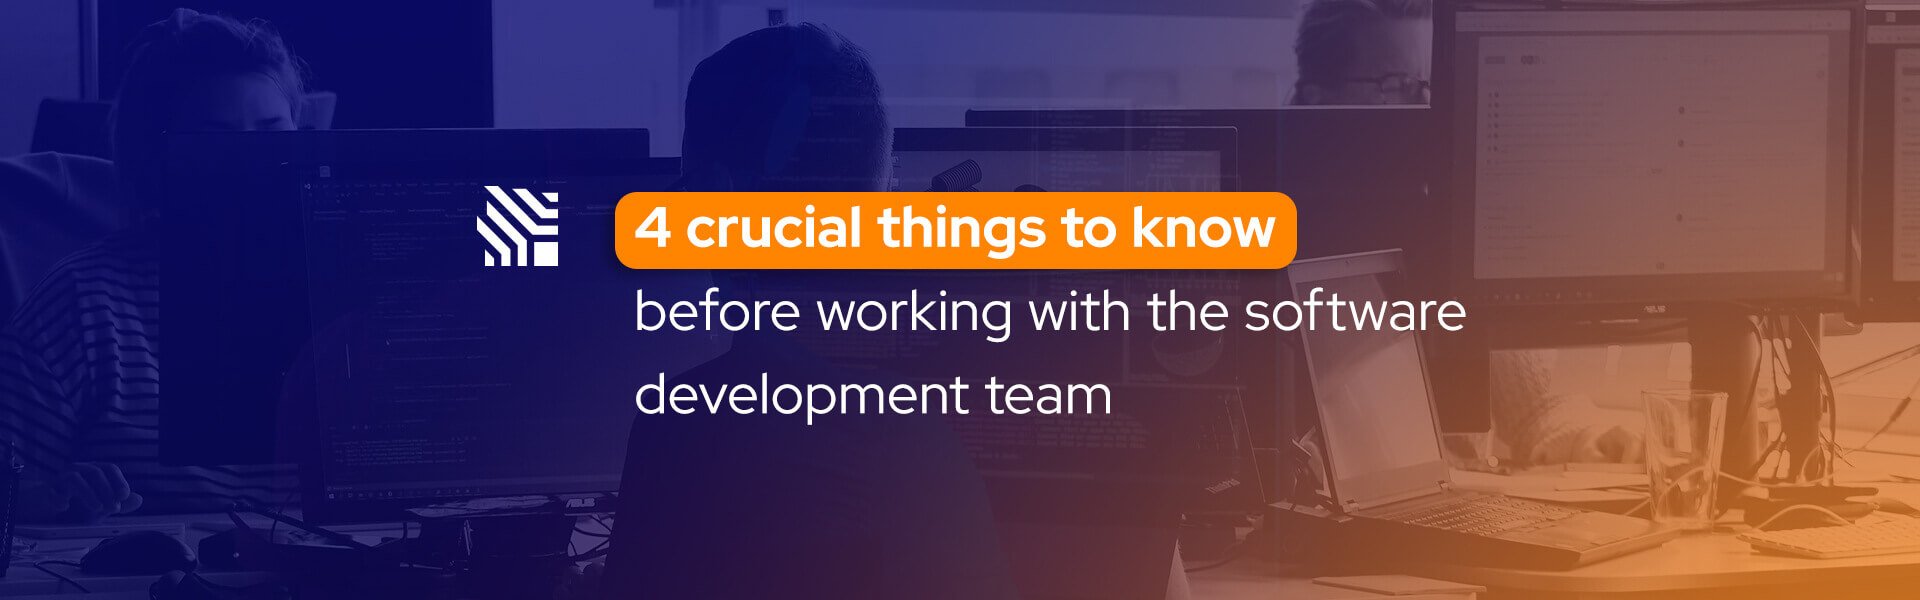 4 crucial things to know before working with the software development team